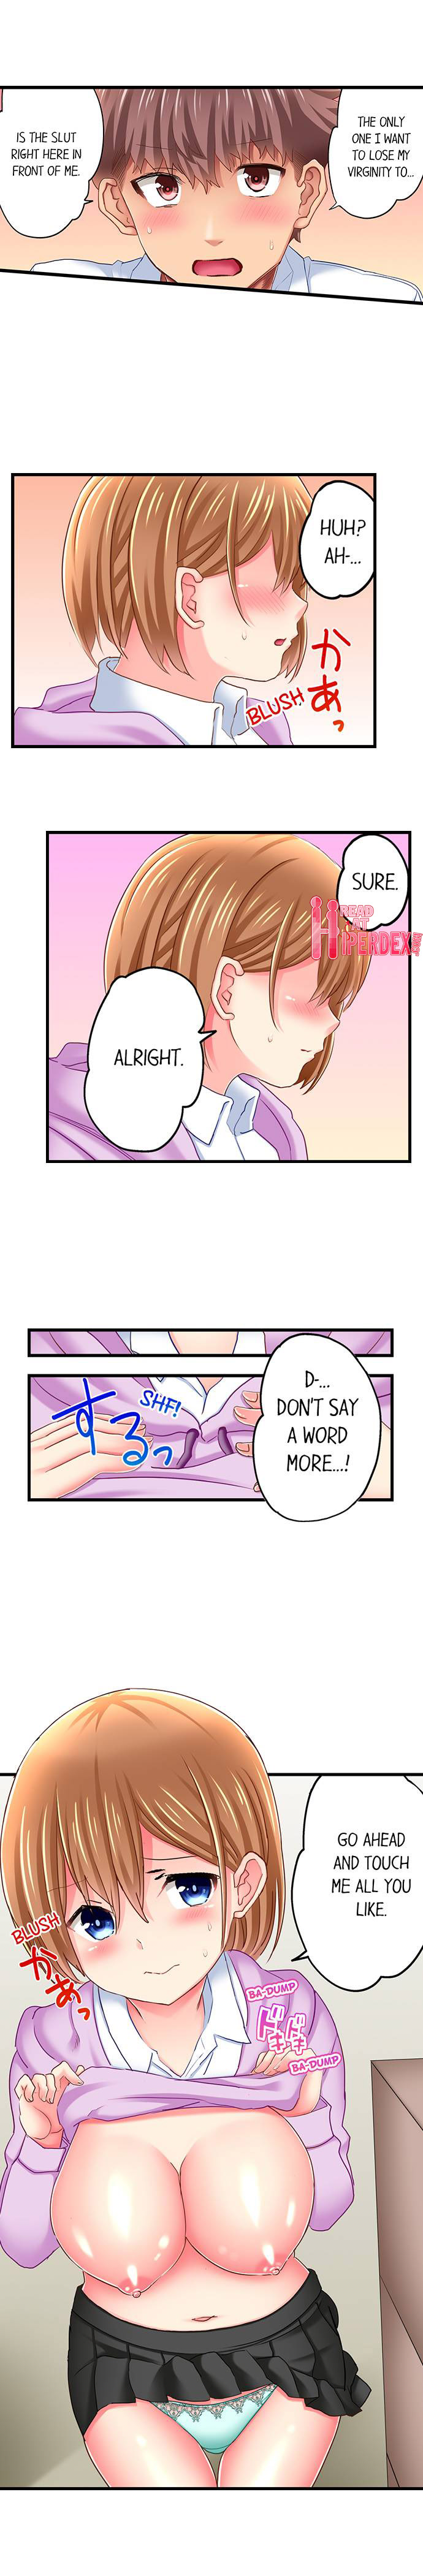 Sex in the Adult Toys Section - Chapter 8 Page 4